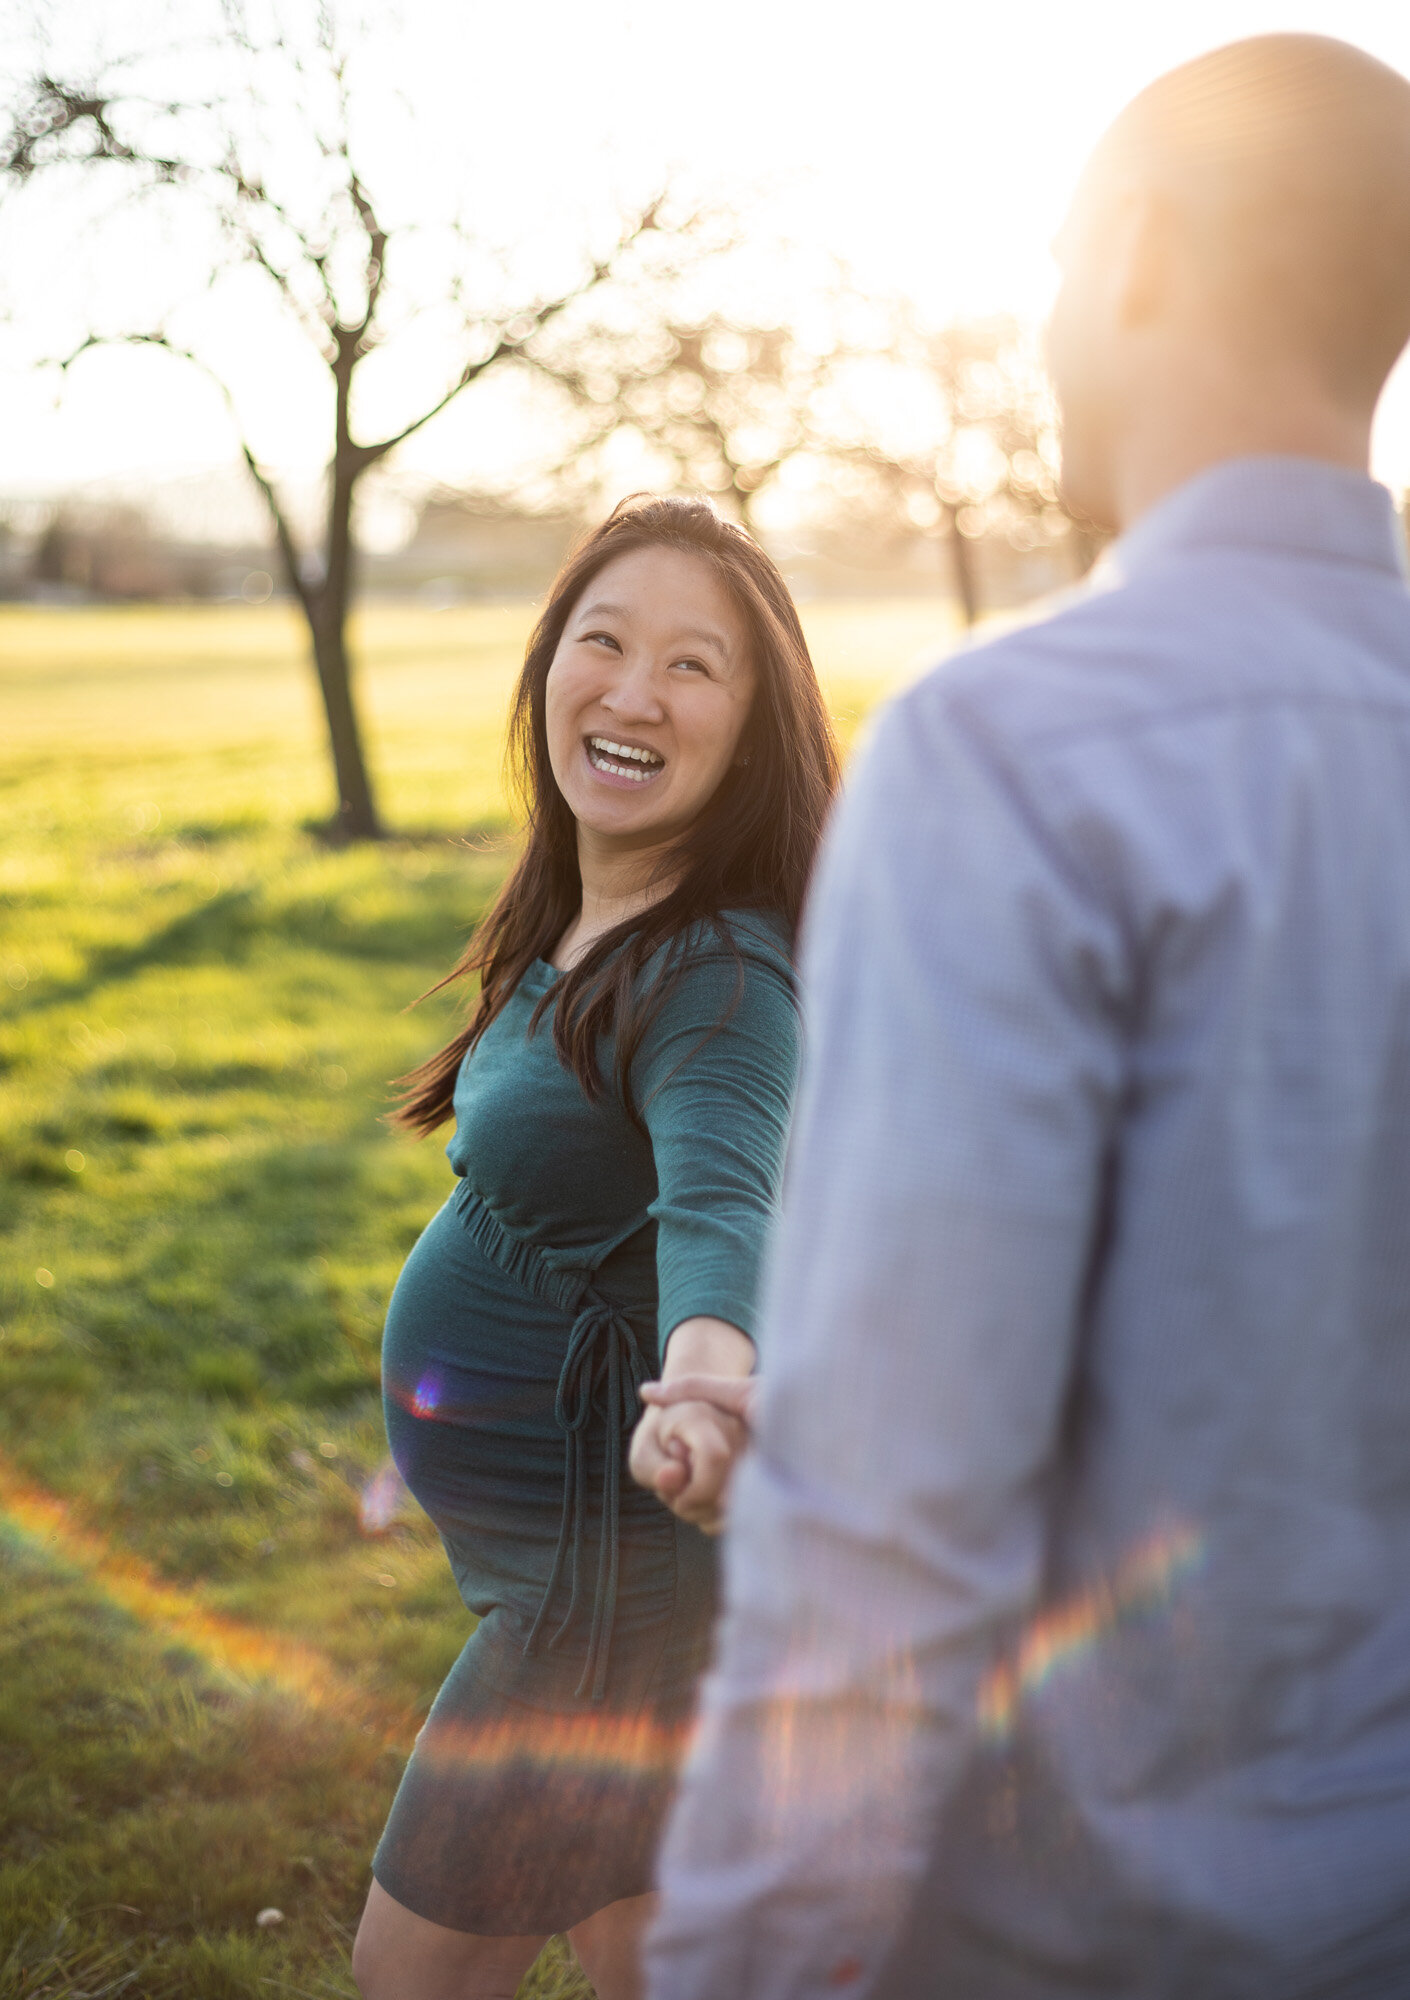 Maternity photography Vancouver Washington | Pregnant woman smiling at her husband at they walk towards the sun holding hands. 